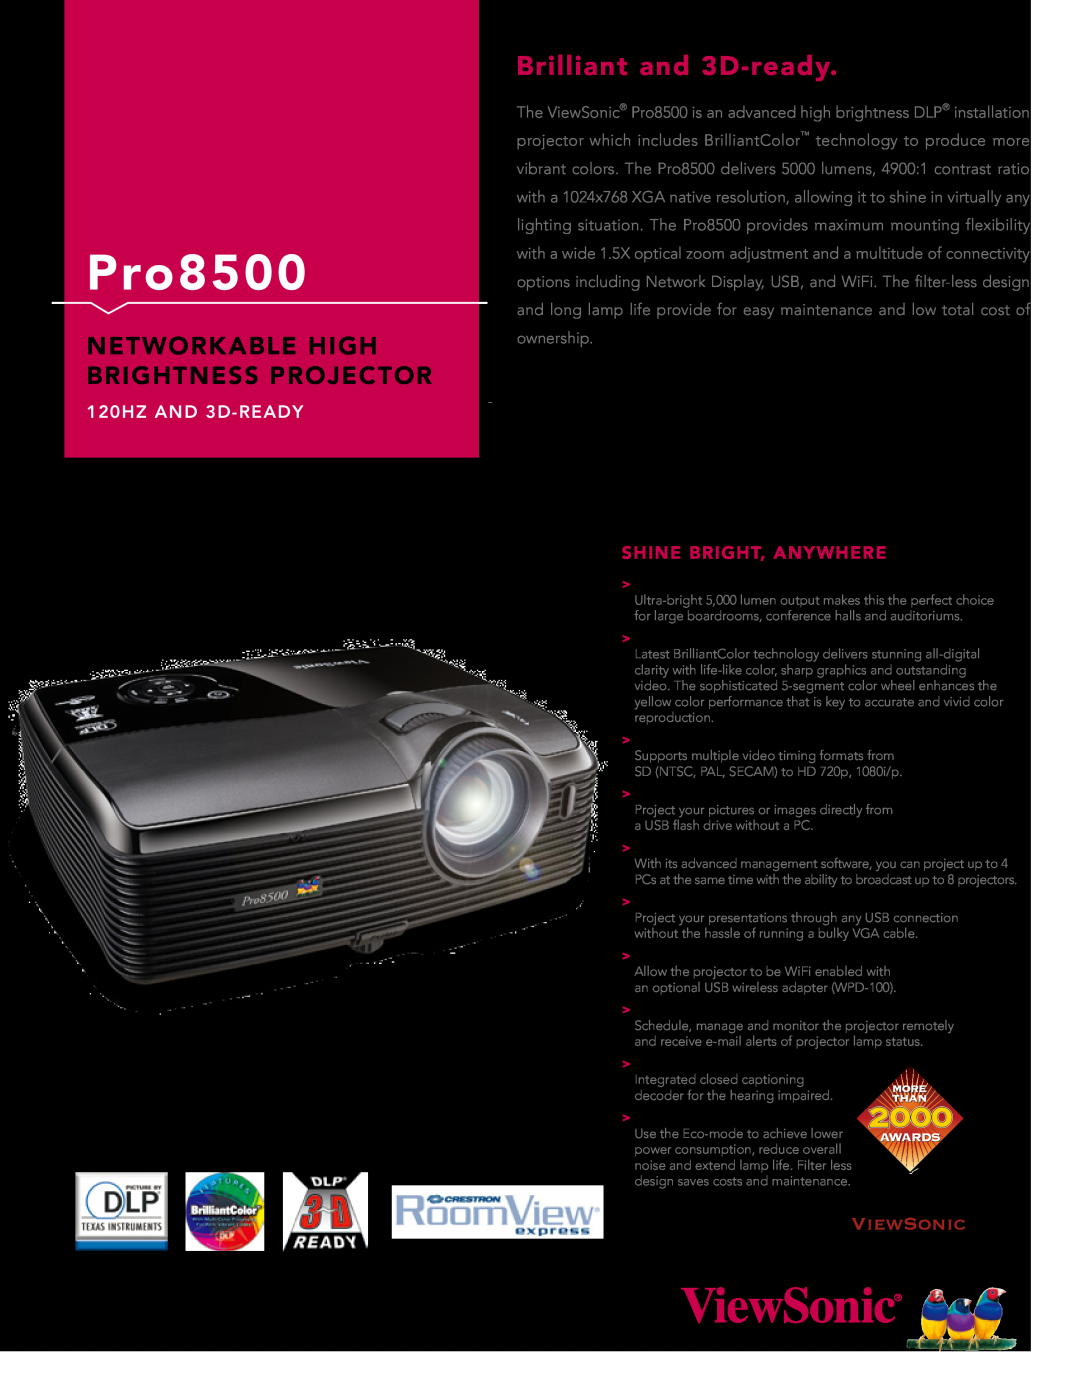 ViewSonic PRO8500 manual Pro8500, Brilliant and 3D-ready, Networkable High Brightness Projector, 120HZ AND 3D-READY 